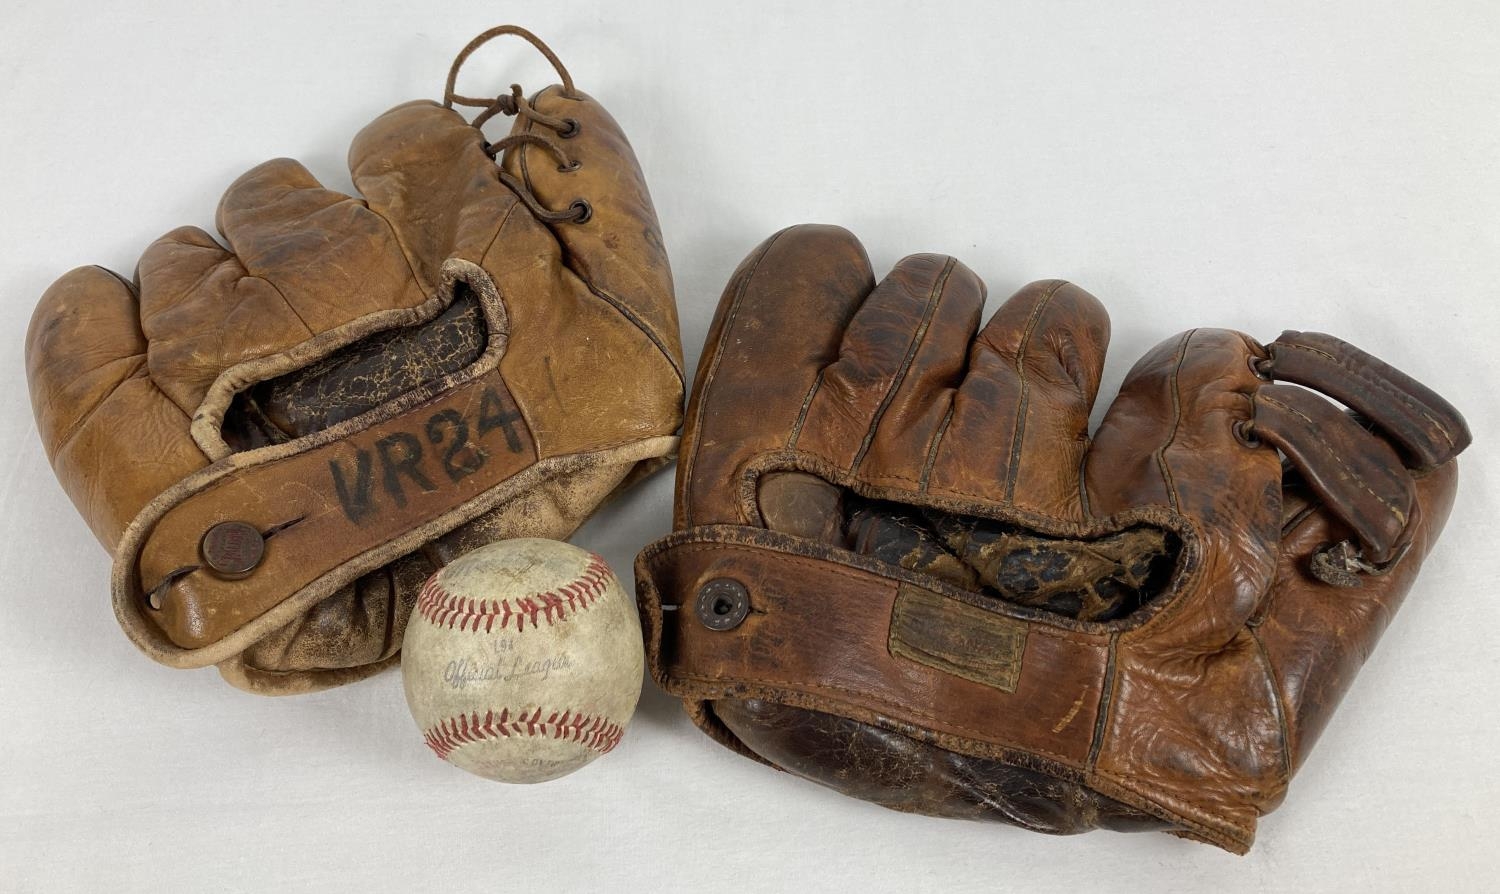 2 vintage leather baseball gloves, one marked "Softball USN" the other "Nokona". Together with a